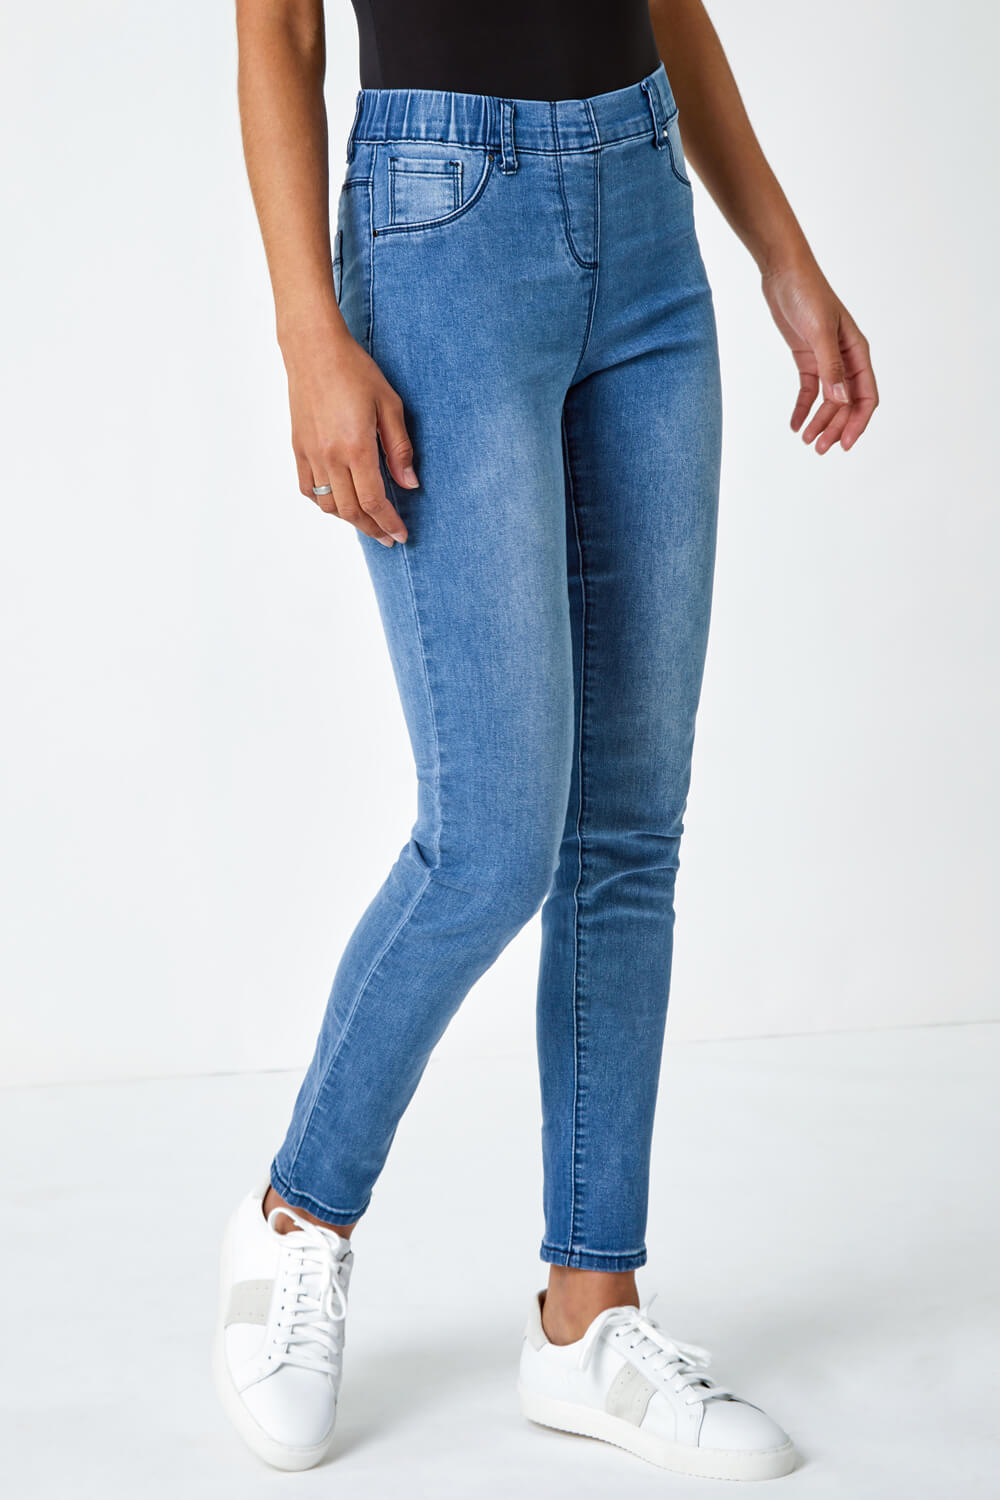 Blue nr roma Stylish Ladies Jeggings, Size: 28-40 at Rs 460/piece